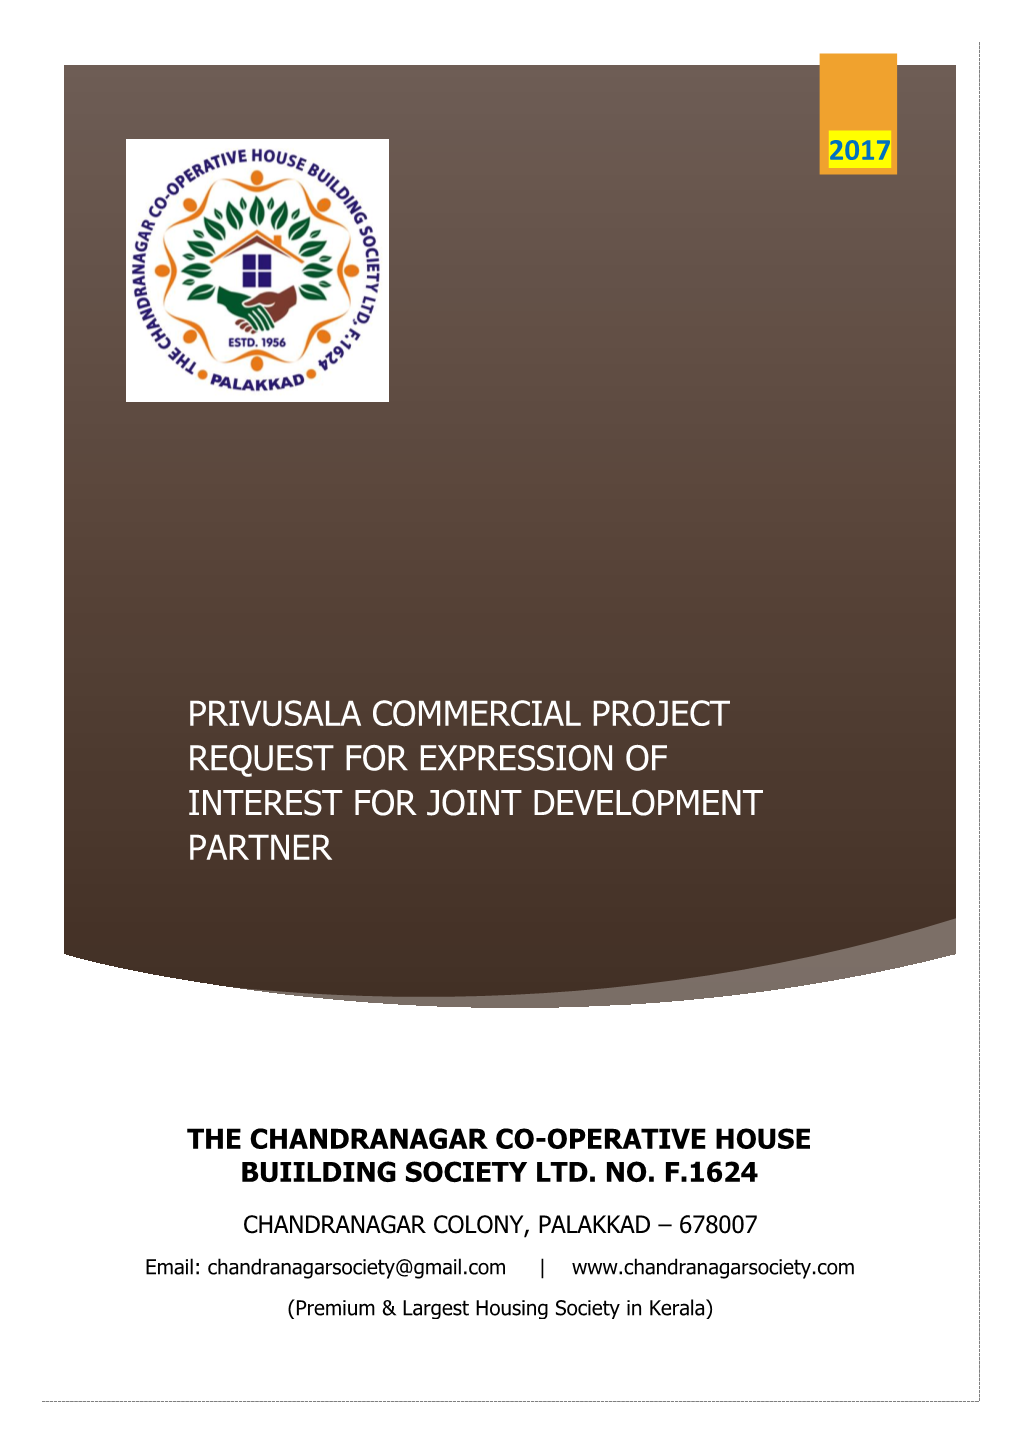 Privusala Commercial Project Request for Expression of Interest for Joint Development Partner